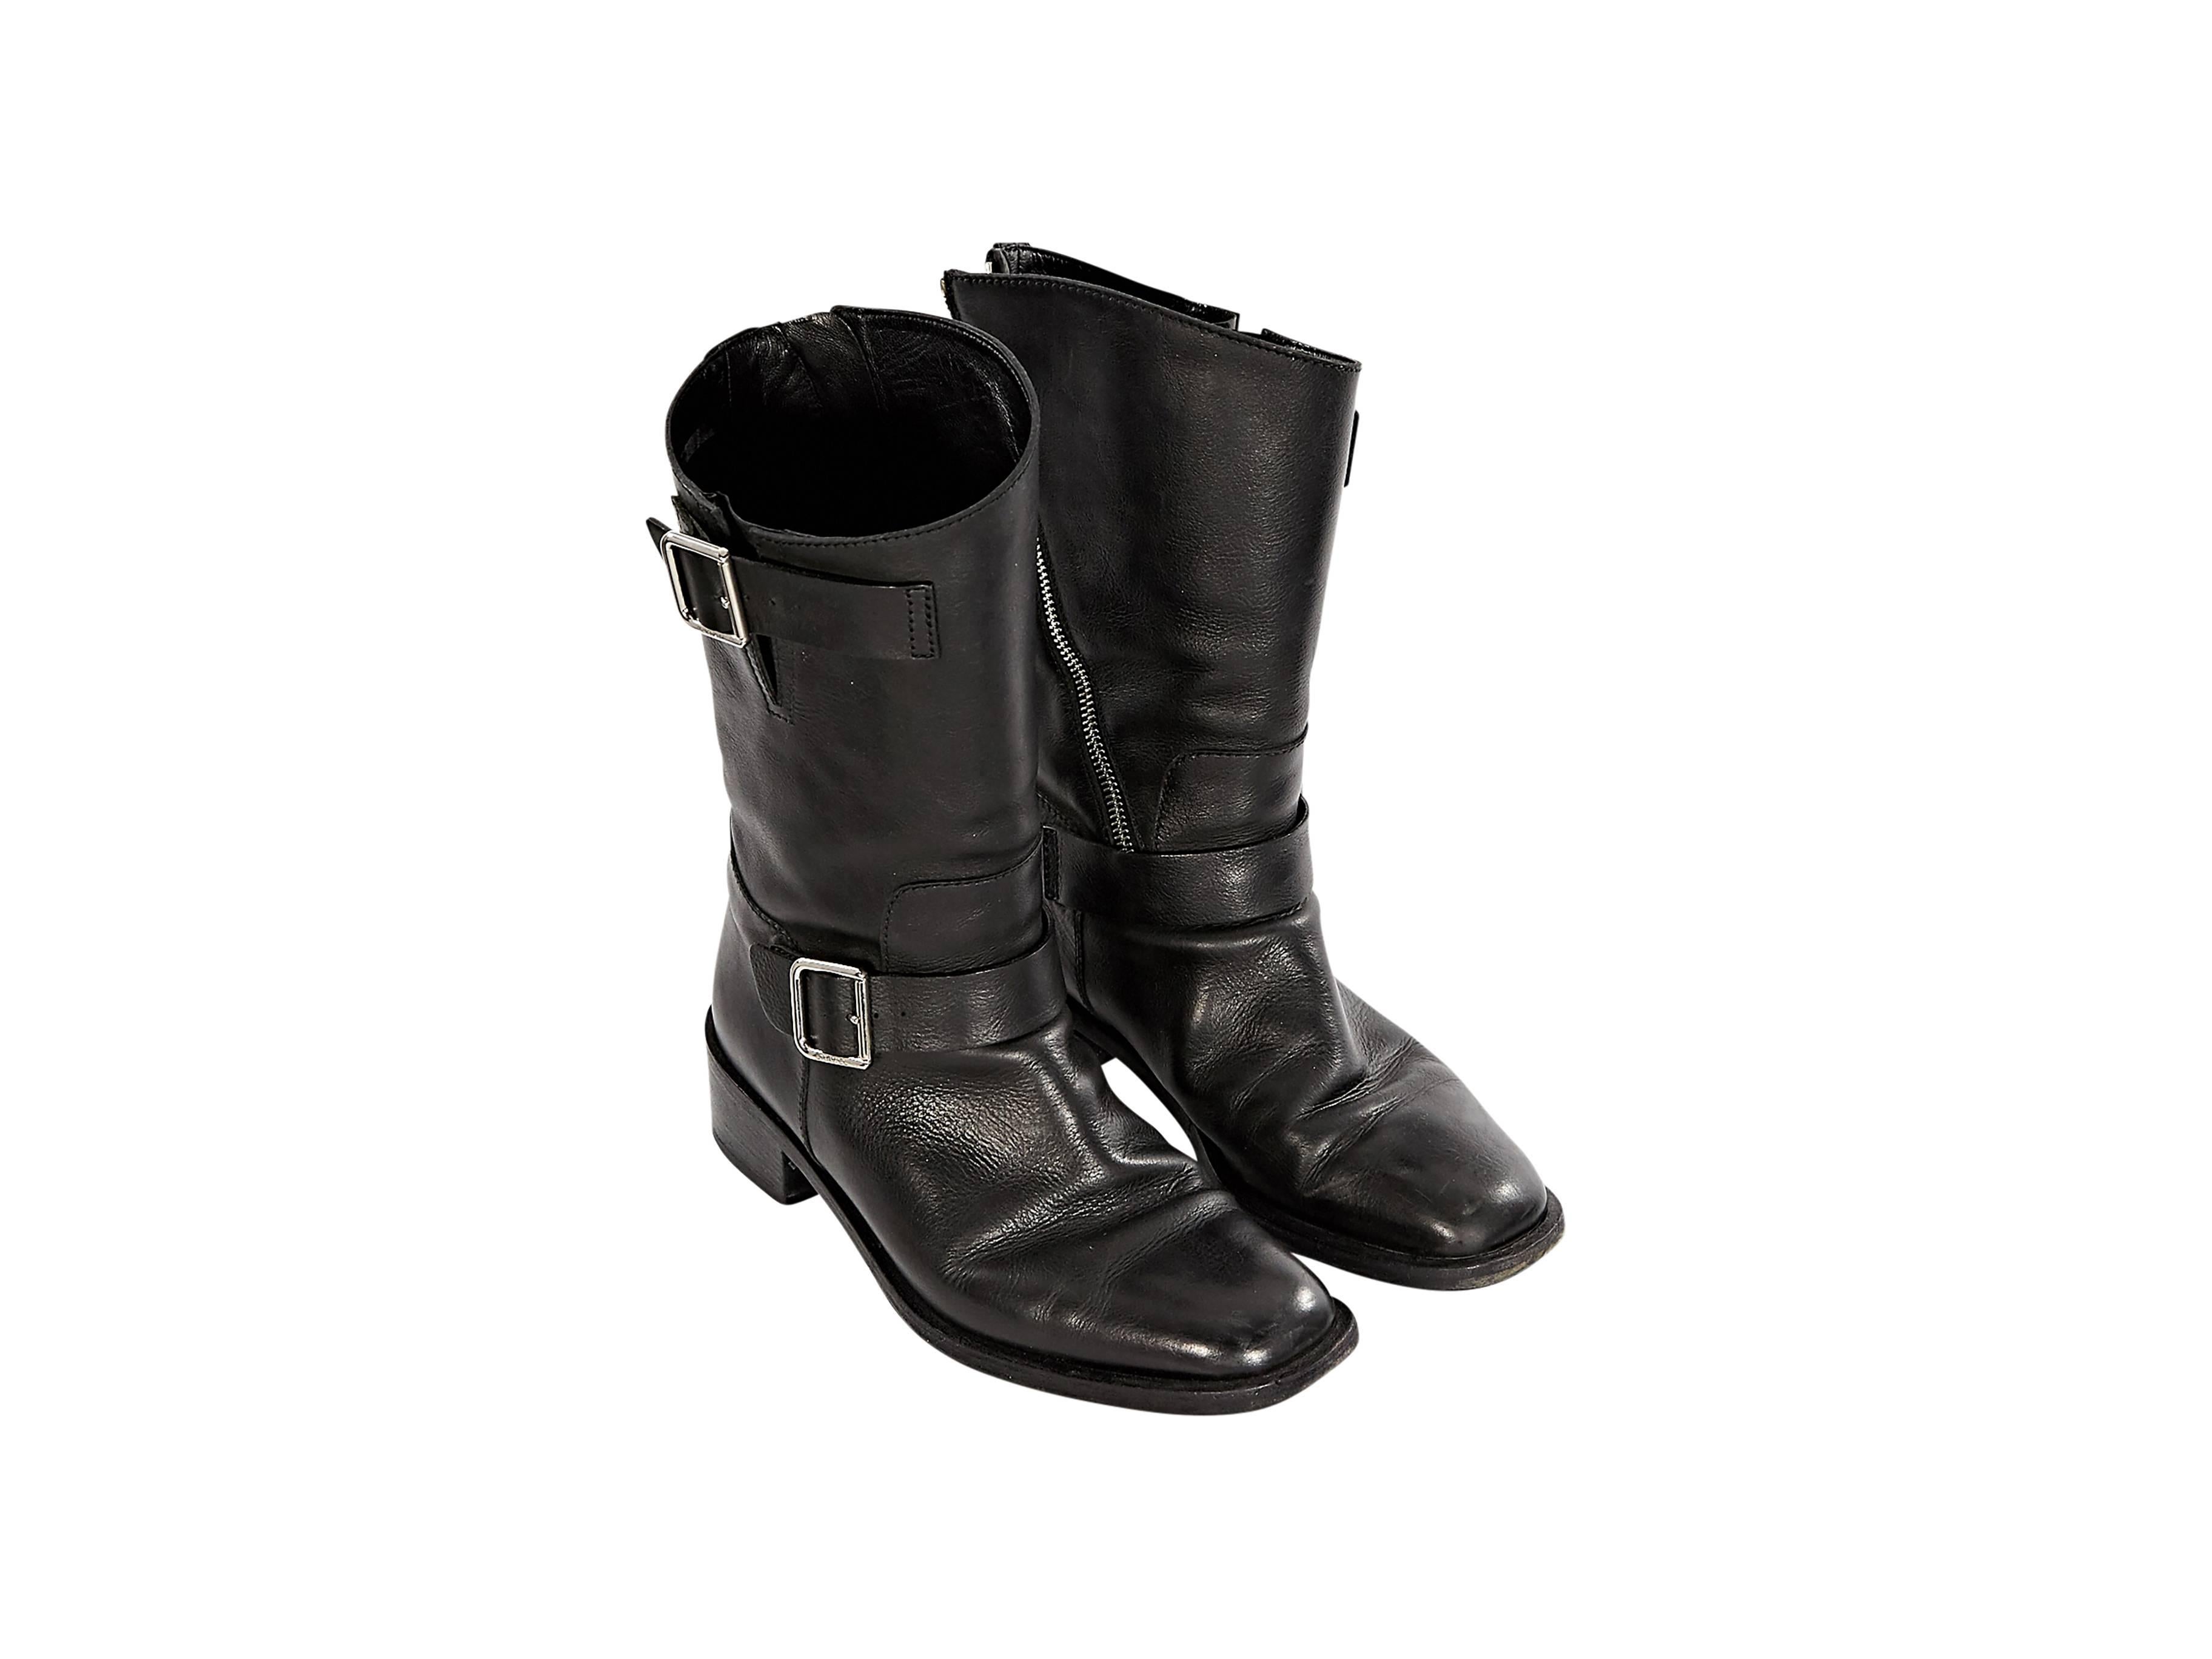 Black leather moto-style boots by Chanel.  Accented with two buckle straps.  Inner diagonal zip closure.  Rounded square toe.  Stacked heel.  Silvertone hardware.  